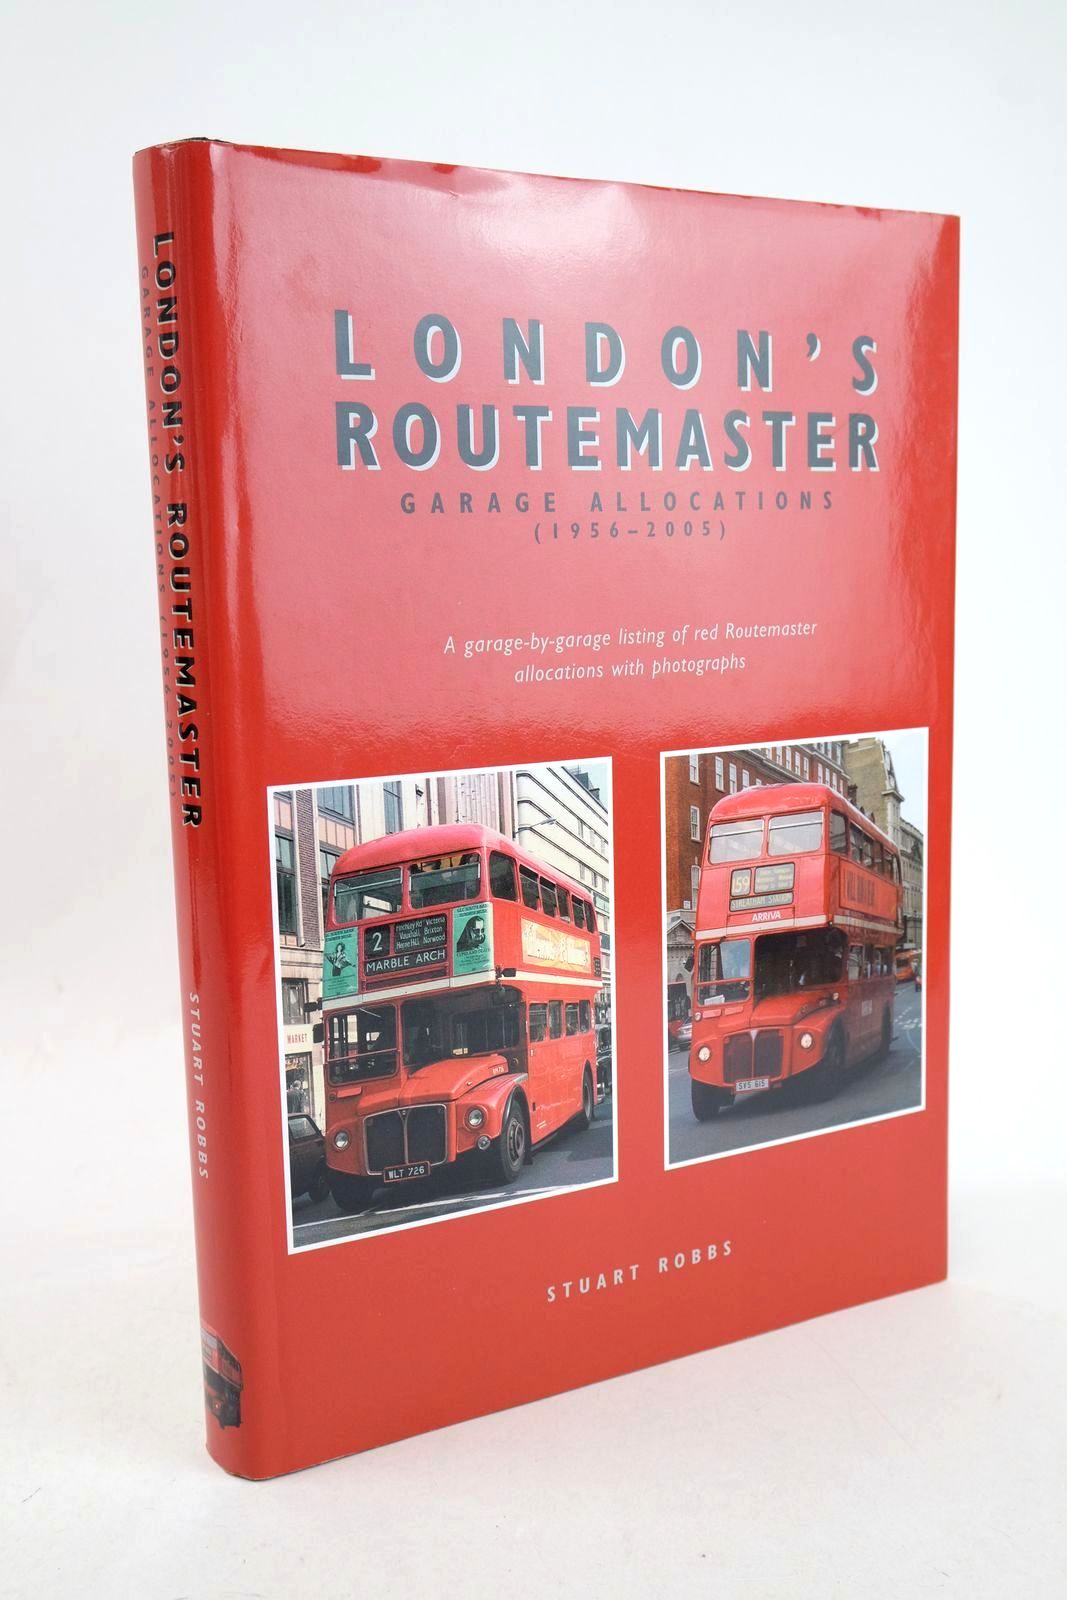 Photo of LONDON'S ROUTEMASTER GARAGE ALLOCATIONS (1956-2005) written by Robbs, Stuart published by Stuart Robbs Publishing (STOCK CODE: 1327588)  for sale by Stella & Rose's Books